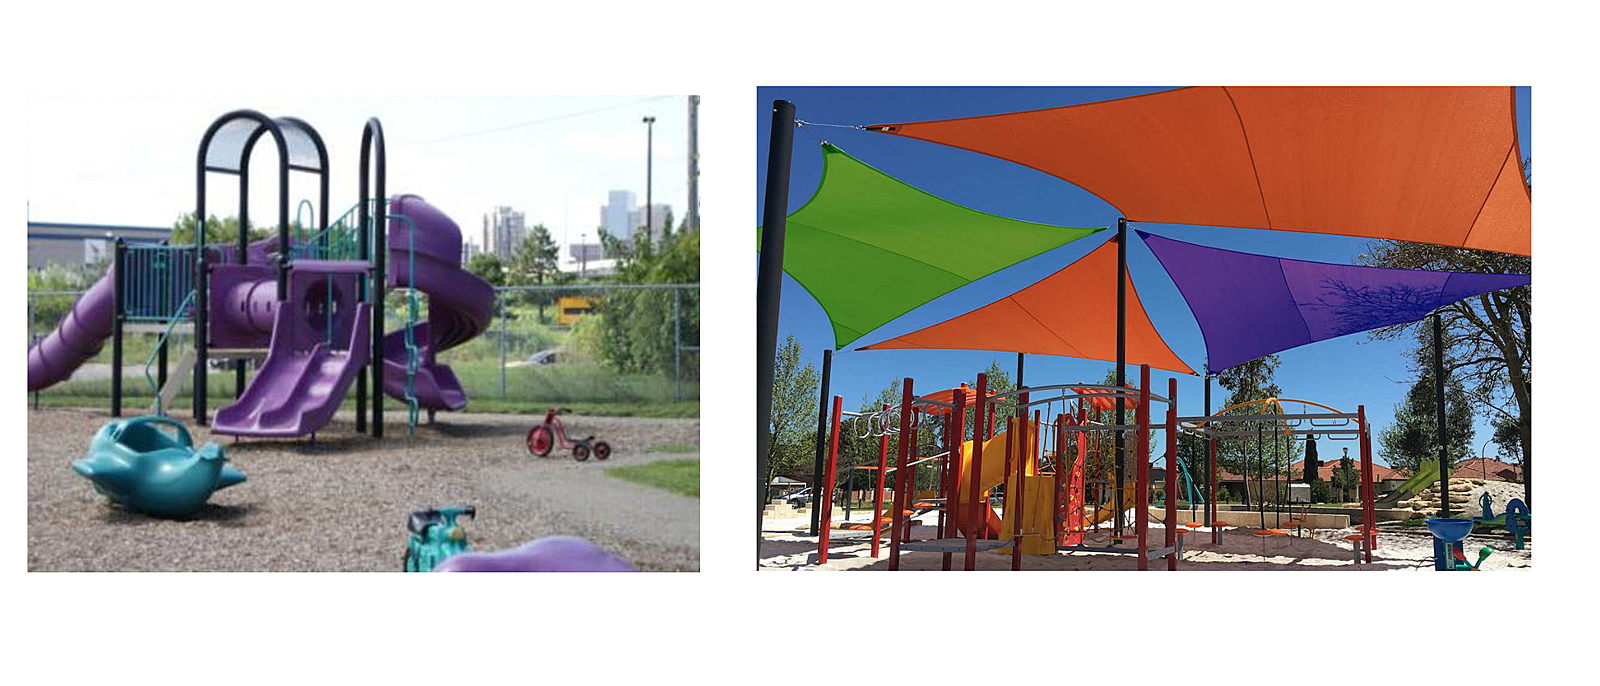 Current playground and example of shade structure with sails